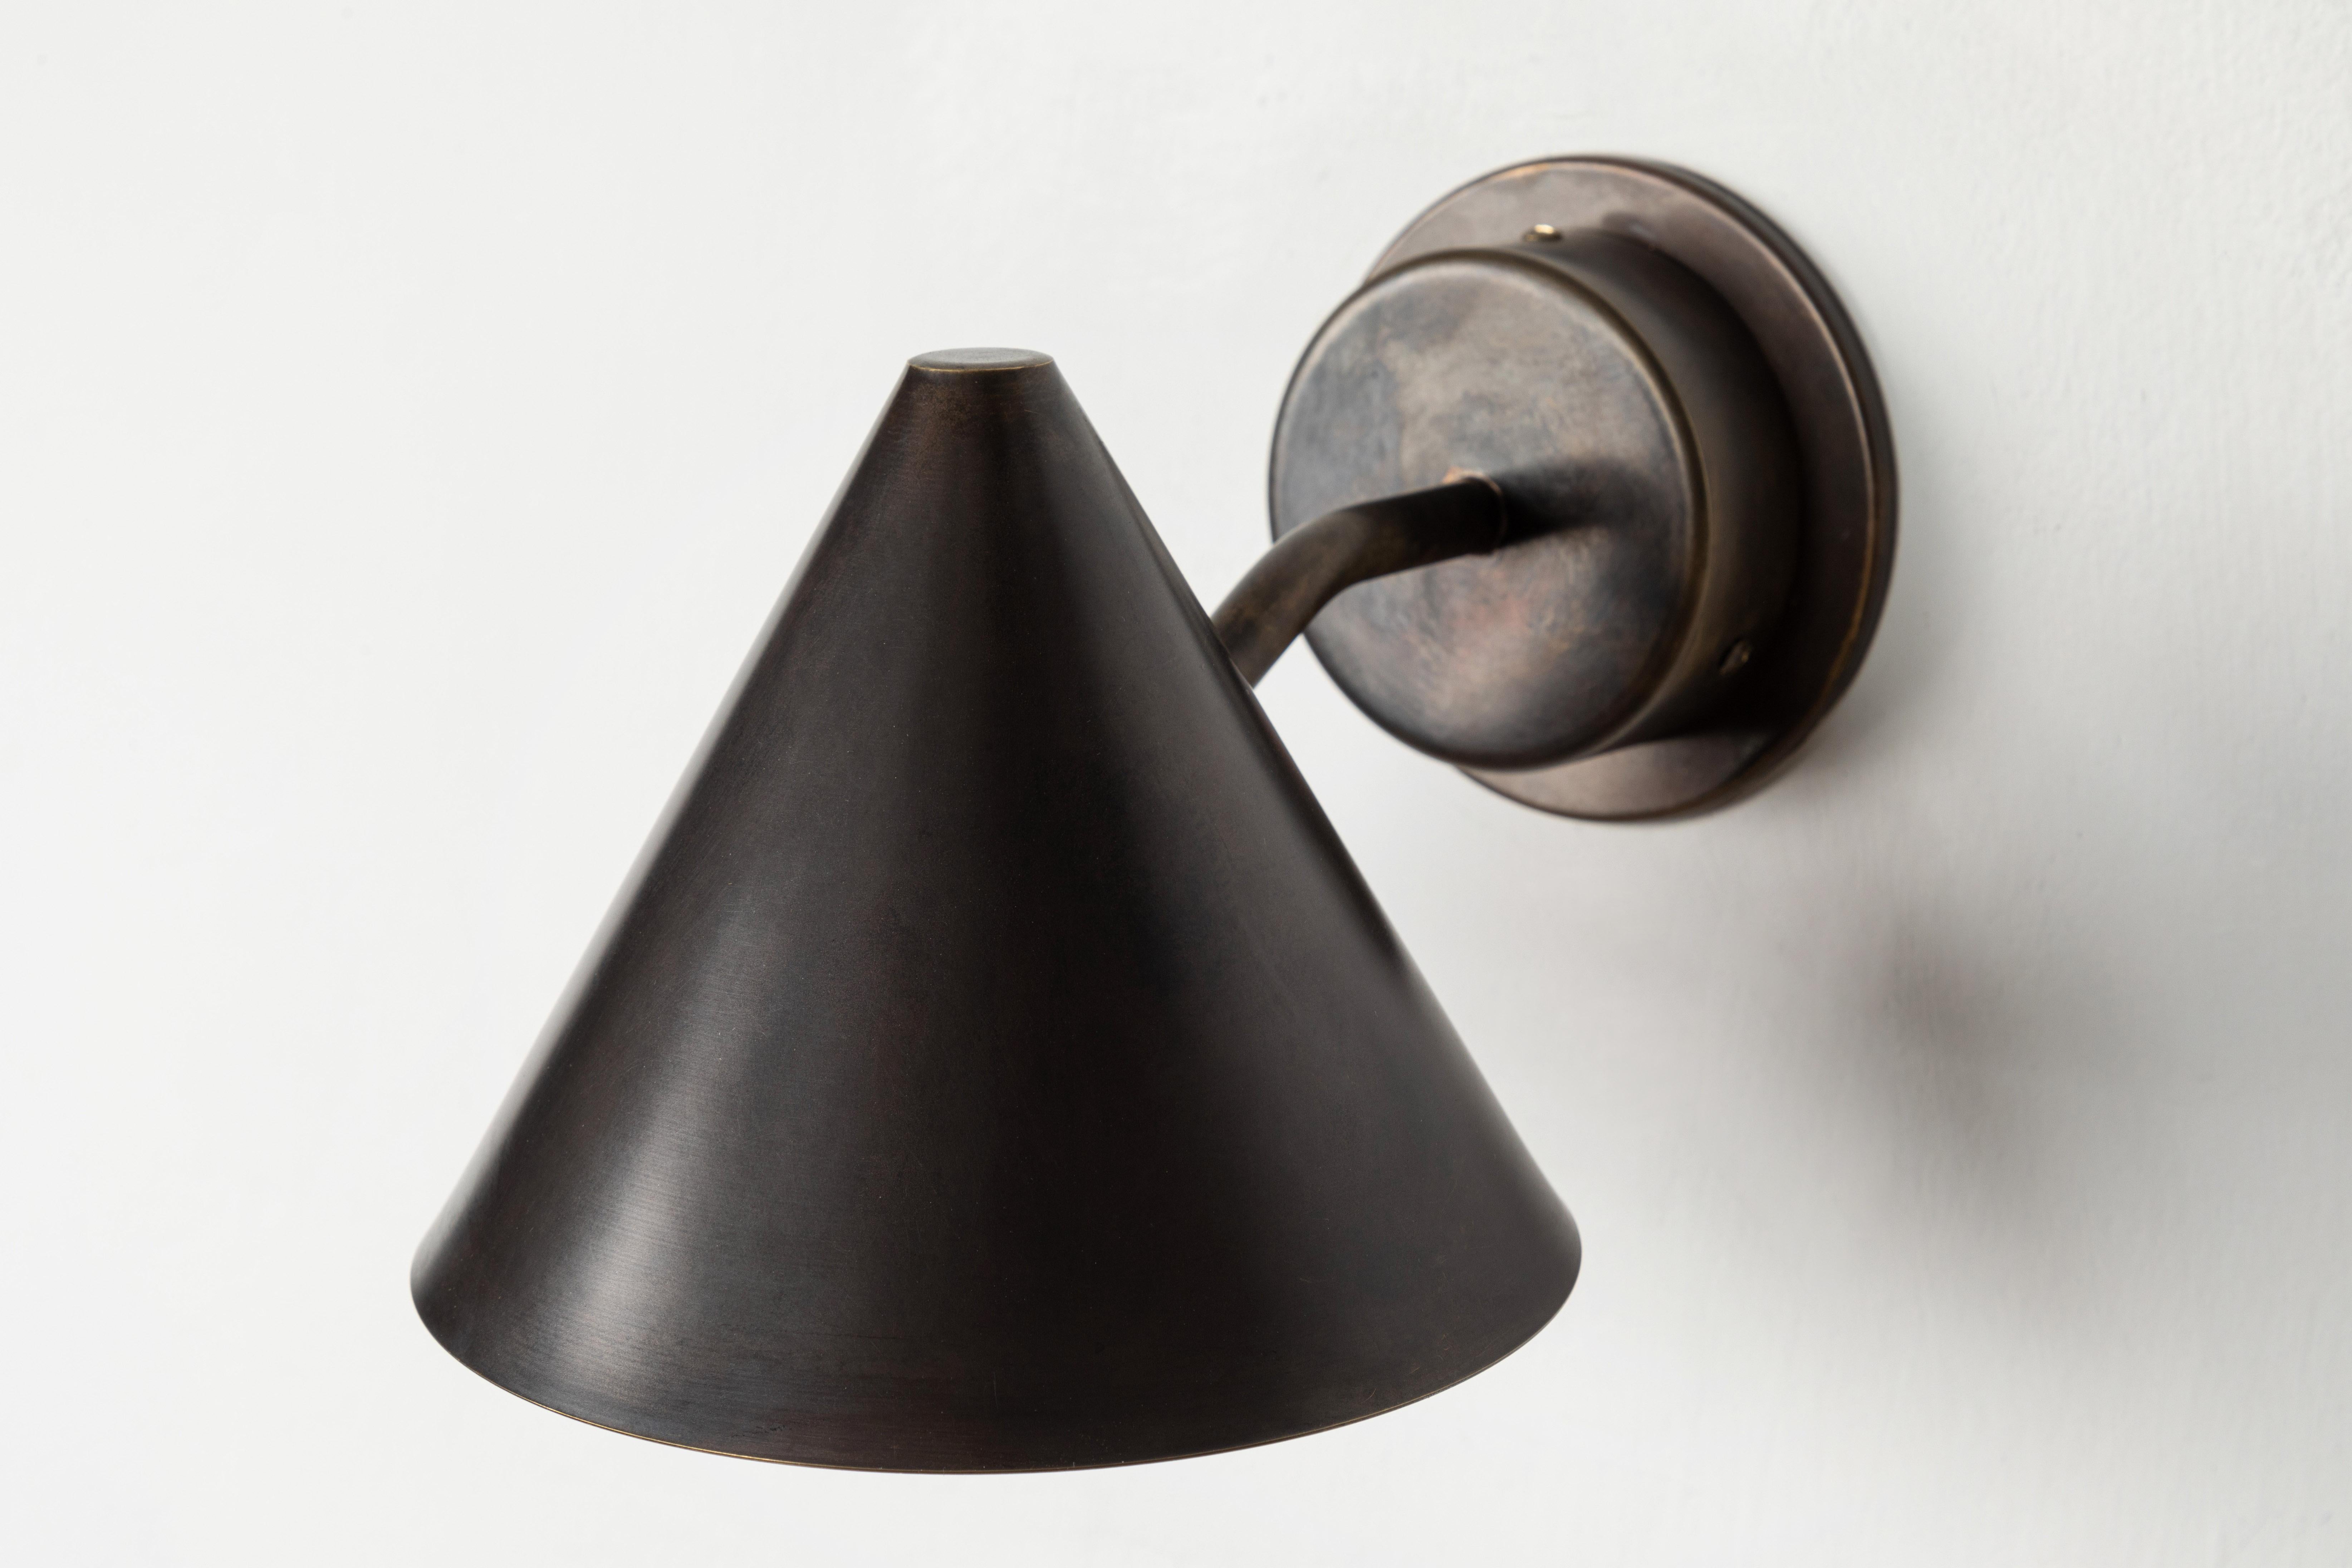 Hans-Agne Jakobsson 'Mini-Tratten' Dark Brown Patinated Outdoor Sconce For Sale 2